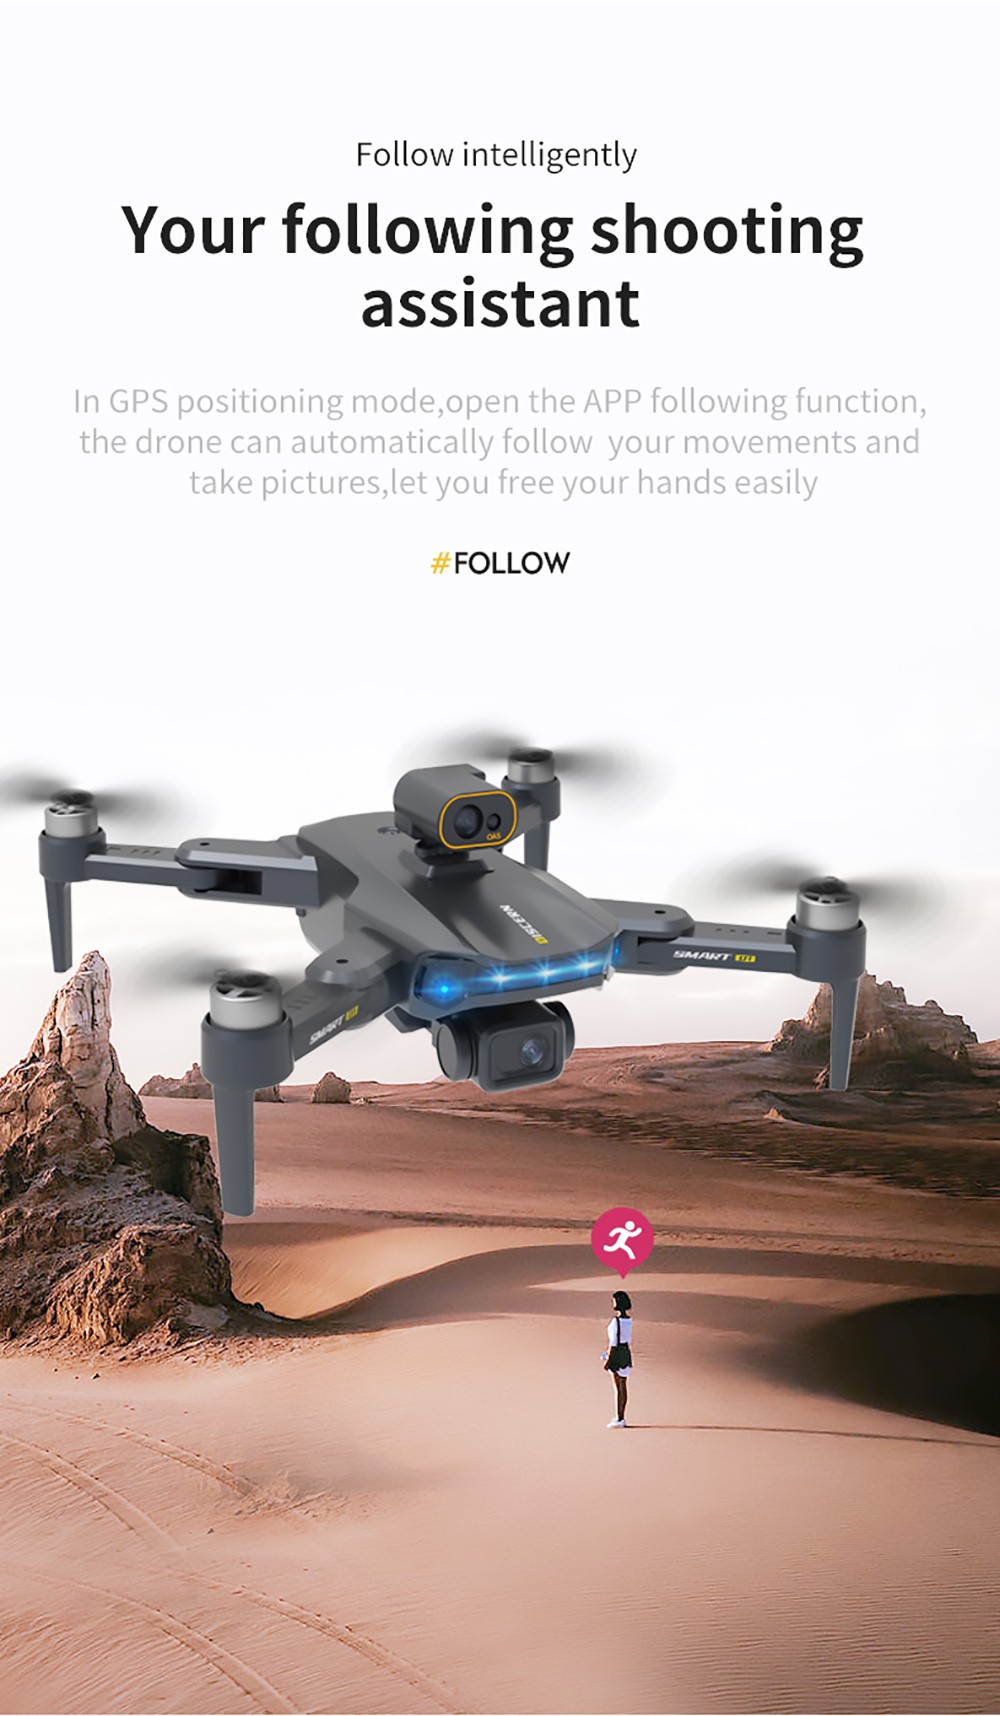 JJRC X21 RC Drone GPS 5G WiFi FPV with Real 4K HD ESC Camera Quadcopter RTF with Obstacle Avoider 3 Batteries - Black